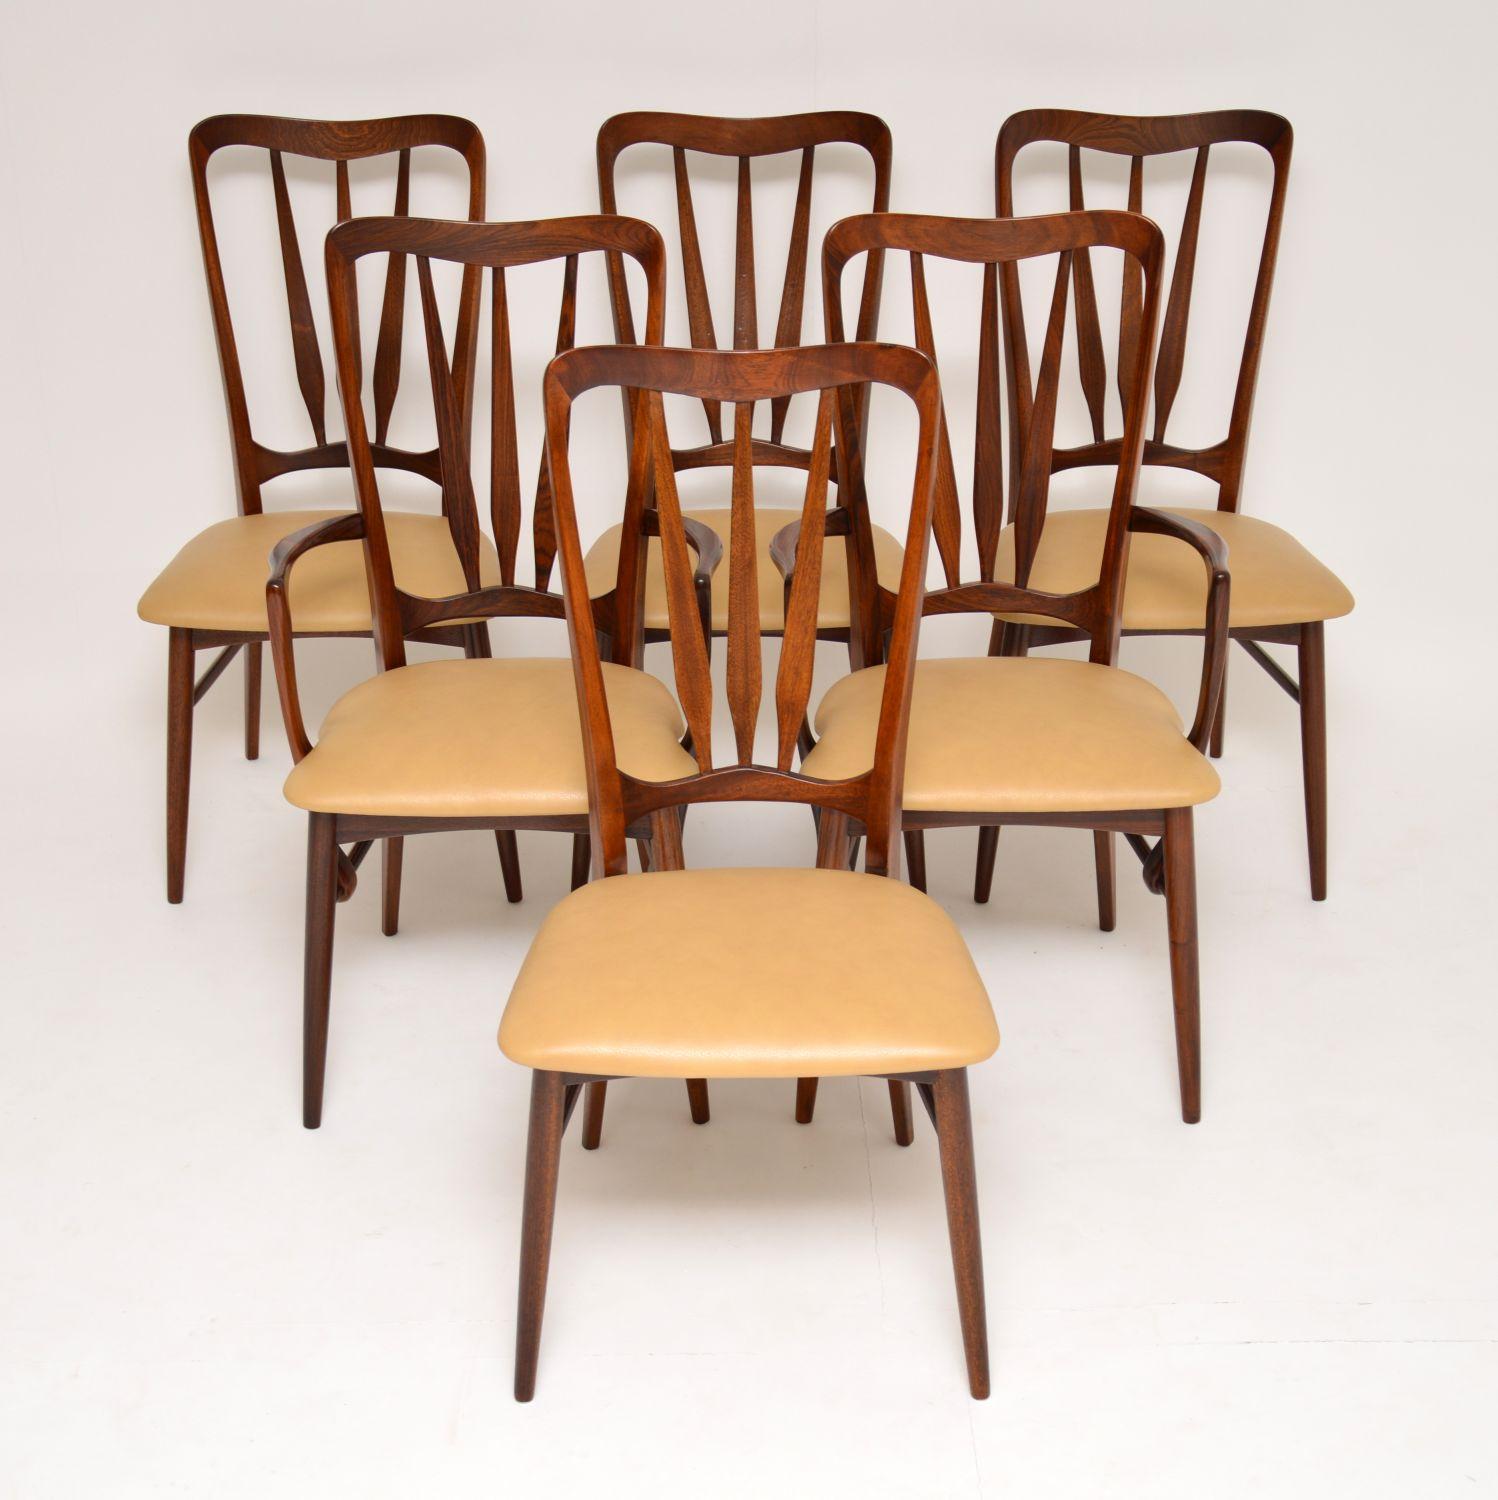 An absolutely stunning and extremely well made set of vintage Danish dining chairs in afromosia wood, these were designed by Nils Kofoed, they were made in Denmark in the 1960s. This model is called the “Ingrid” chair, and they have a beautiful